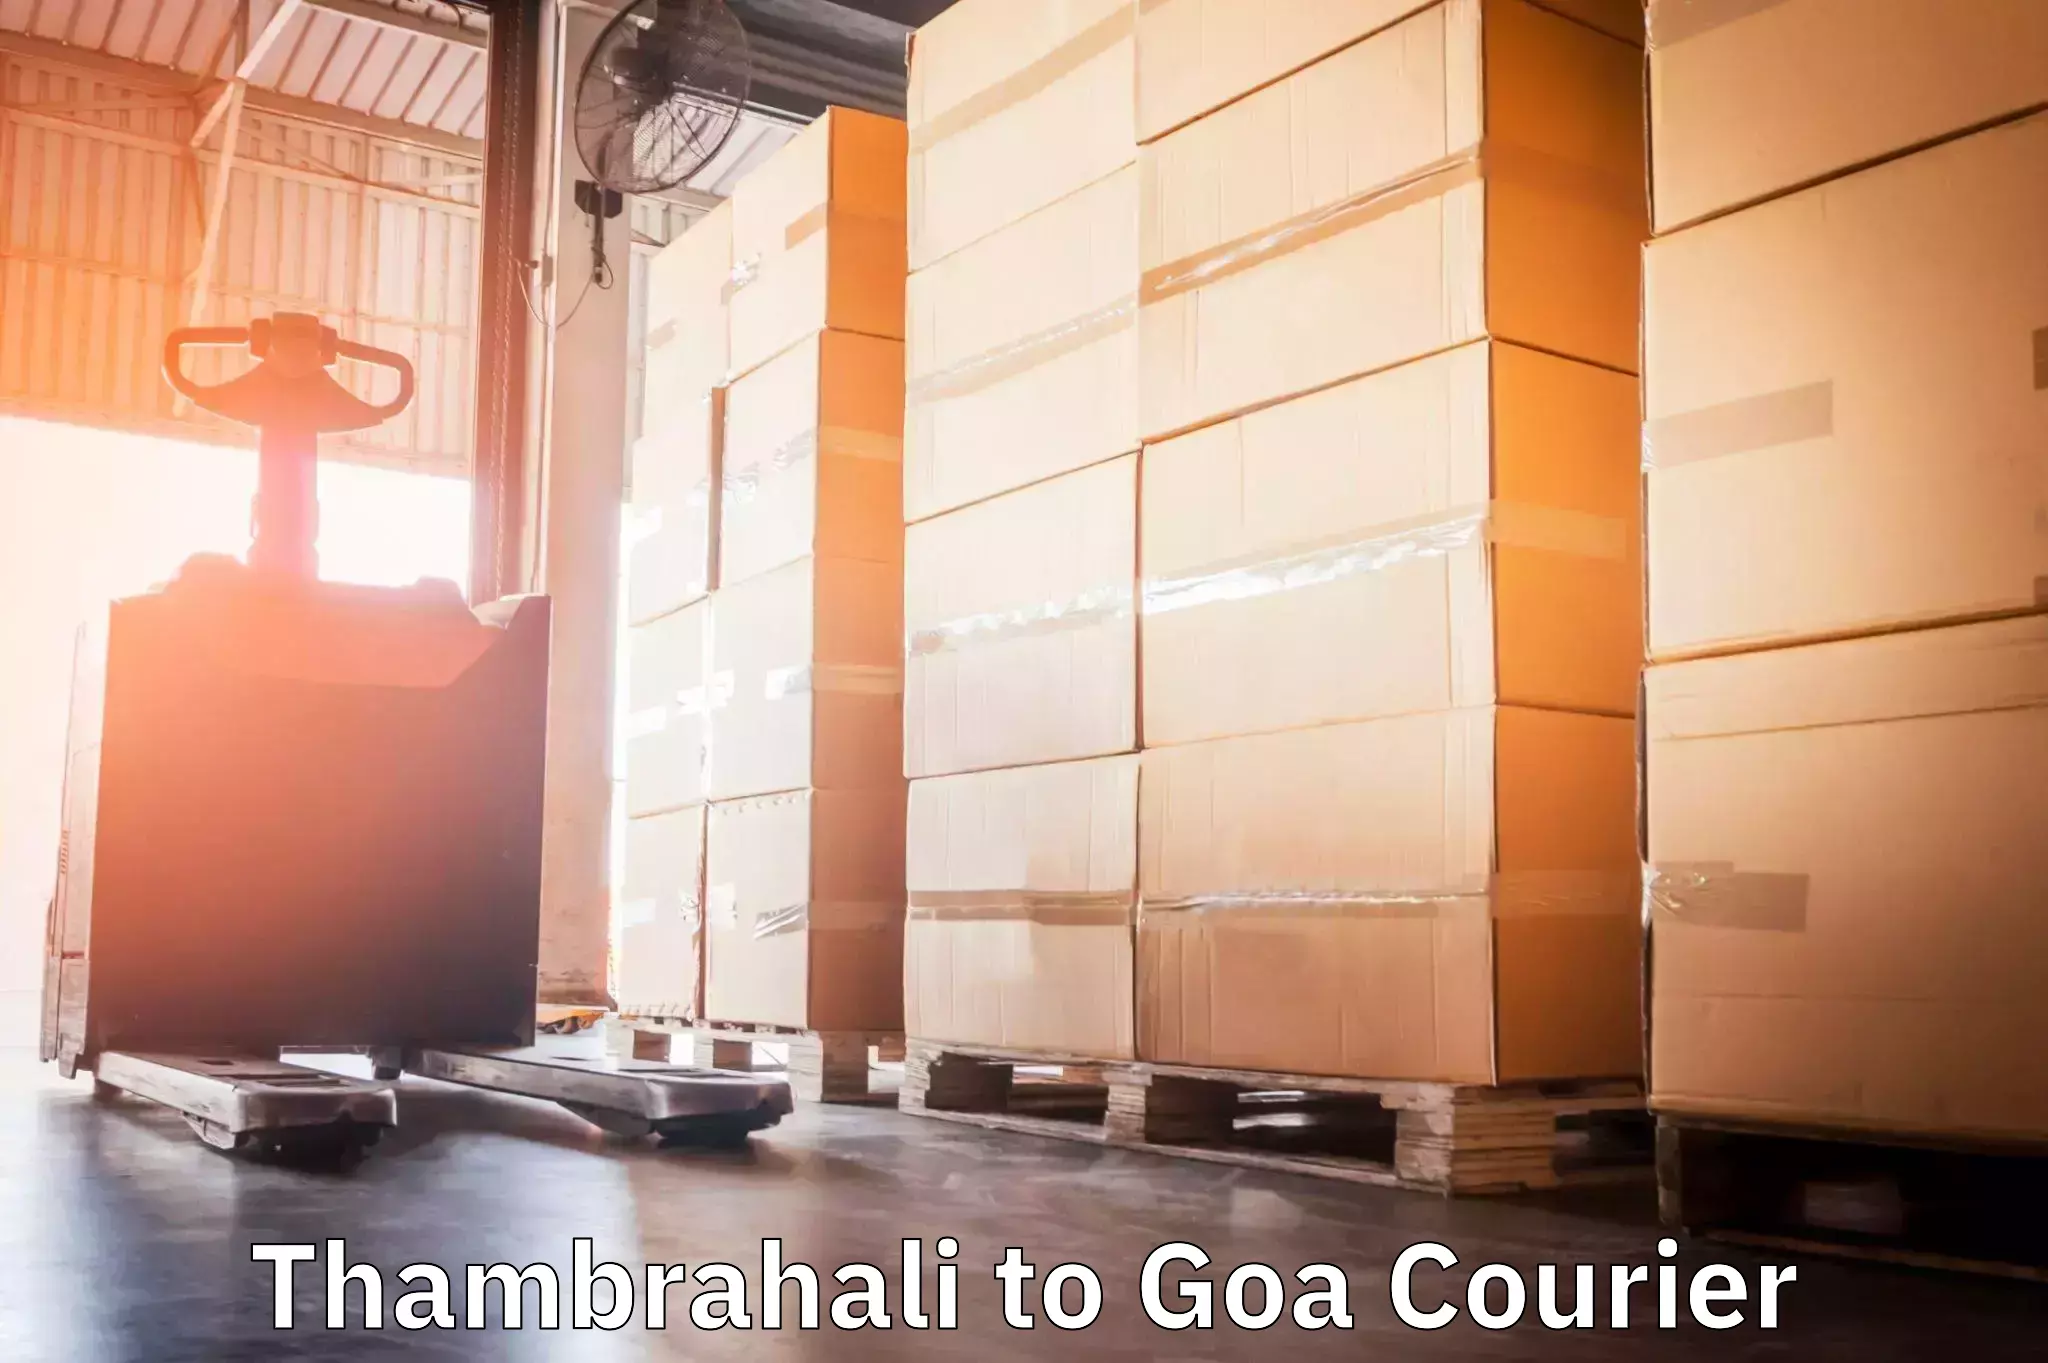 Courier service efficiency Thambrahali to Goa